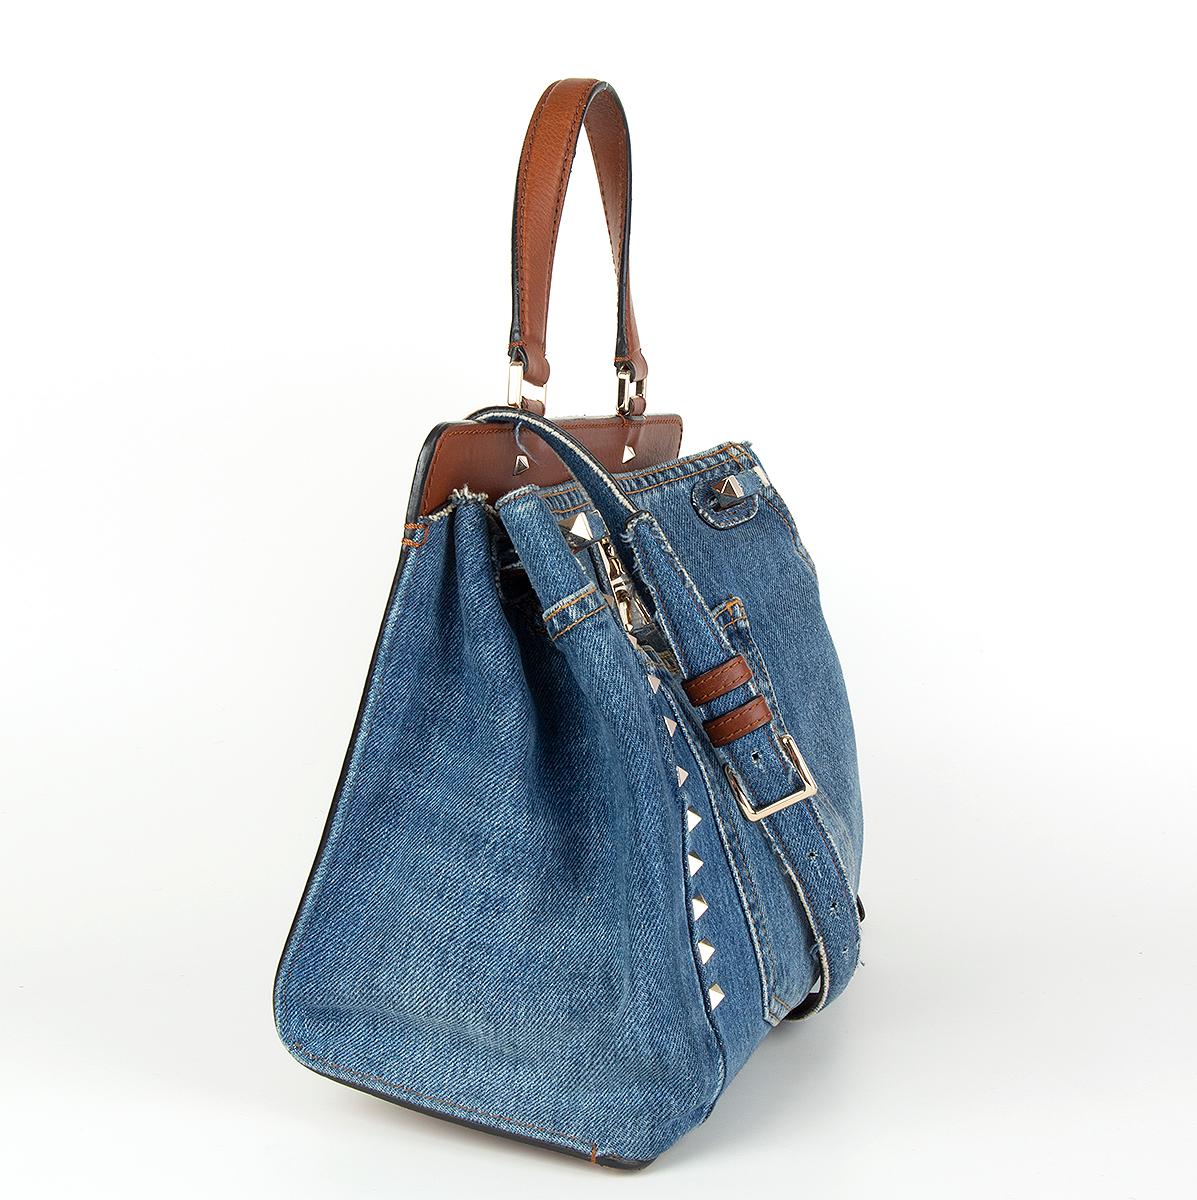 Valentino Garavani 'Joylock' small single handle shoulder bag in blue denim and Stampa Alce calfskin details featuring light gold-tone hardware, front pocket and decorative studs and lock. The bag can be carried by hand thanks to the top single